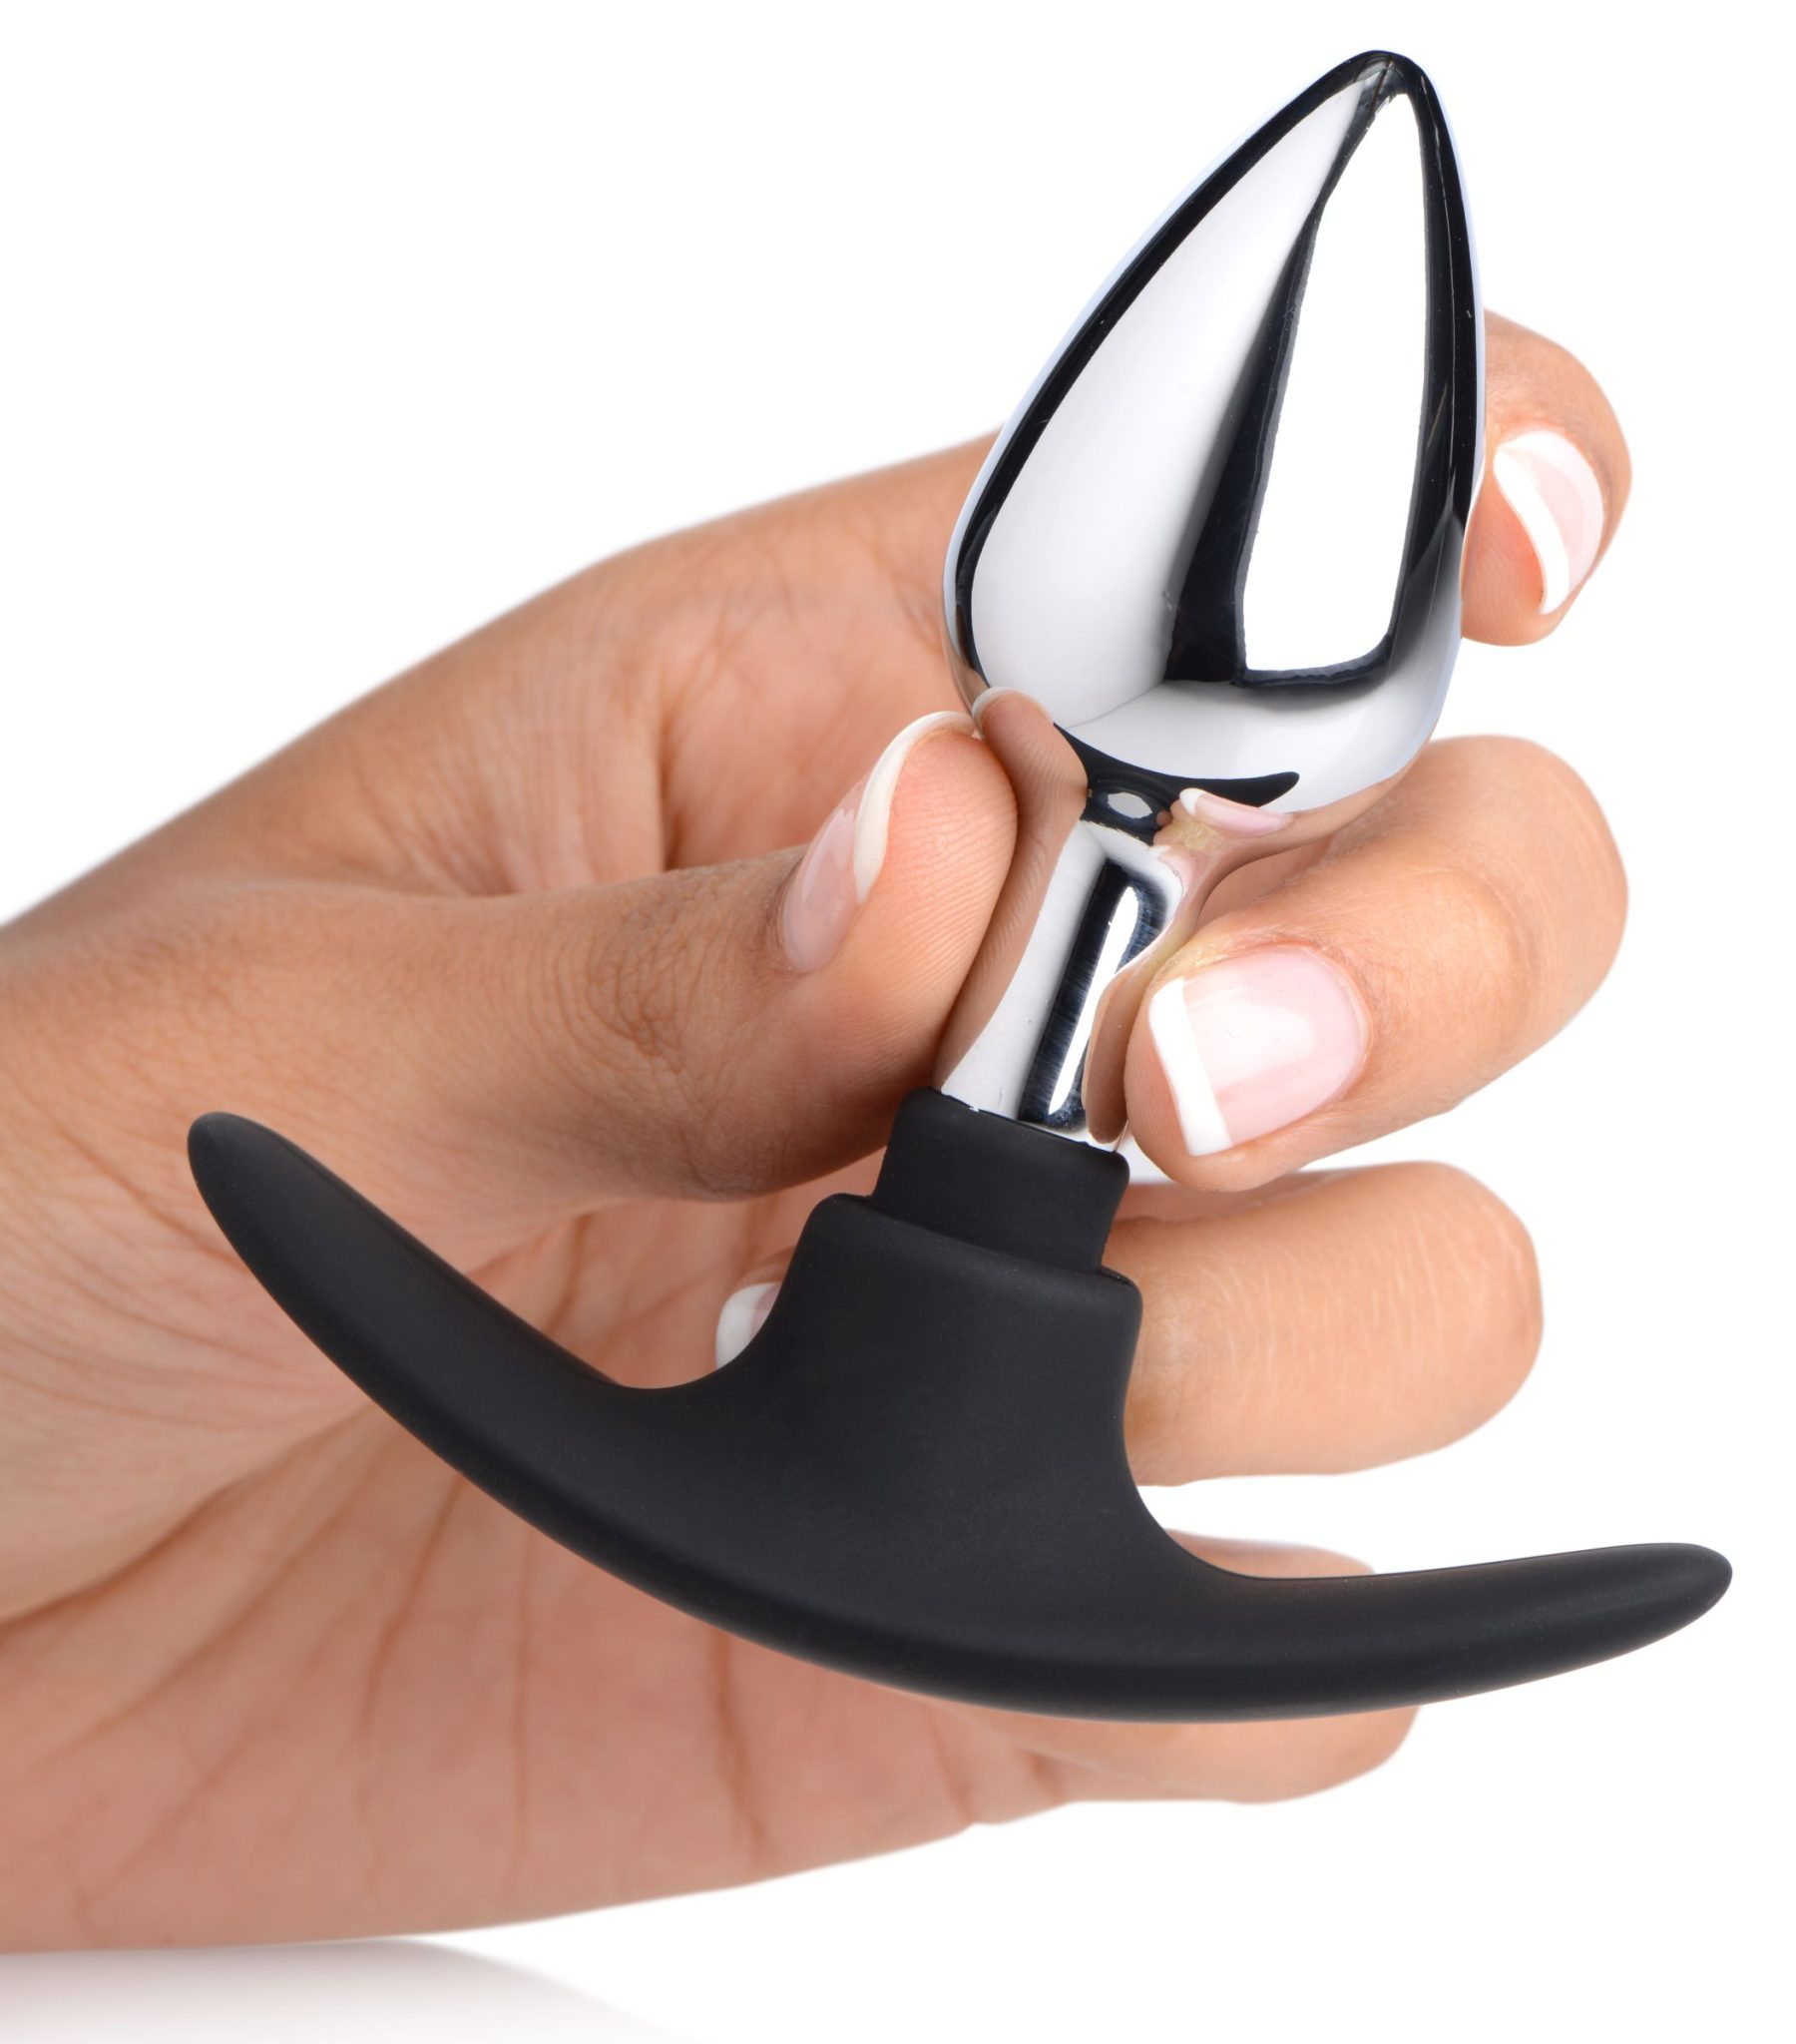 Dark Invader Metal and Silicone Anal Plug – Small